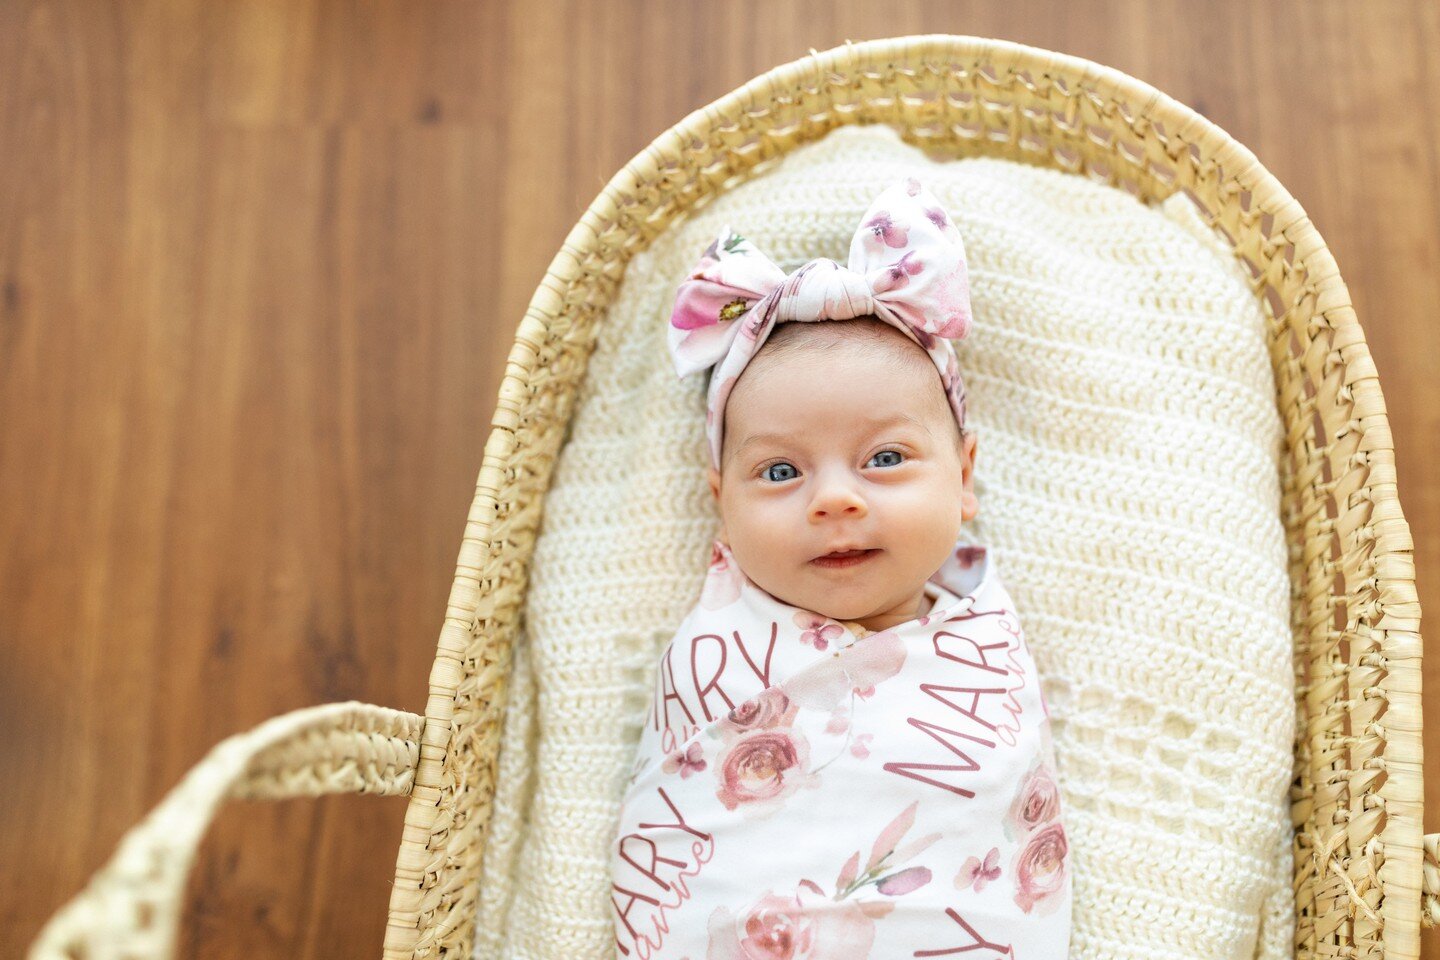 The first few weeks with your newborn can be a total blur. And the last thing you are thinking about is preparing for your upcoming session. That's why I love at-home lifestyle newborn sessions, where I take care of all the planning and preparation a